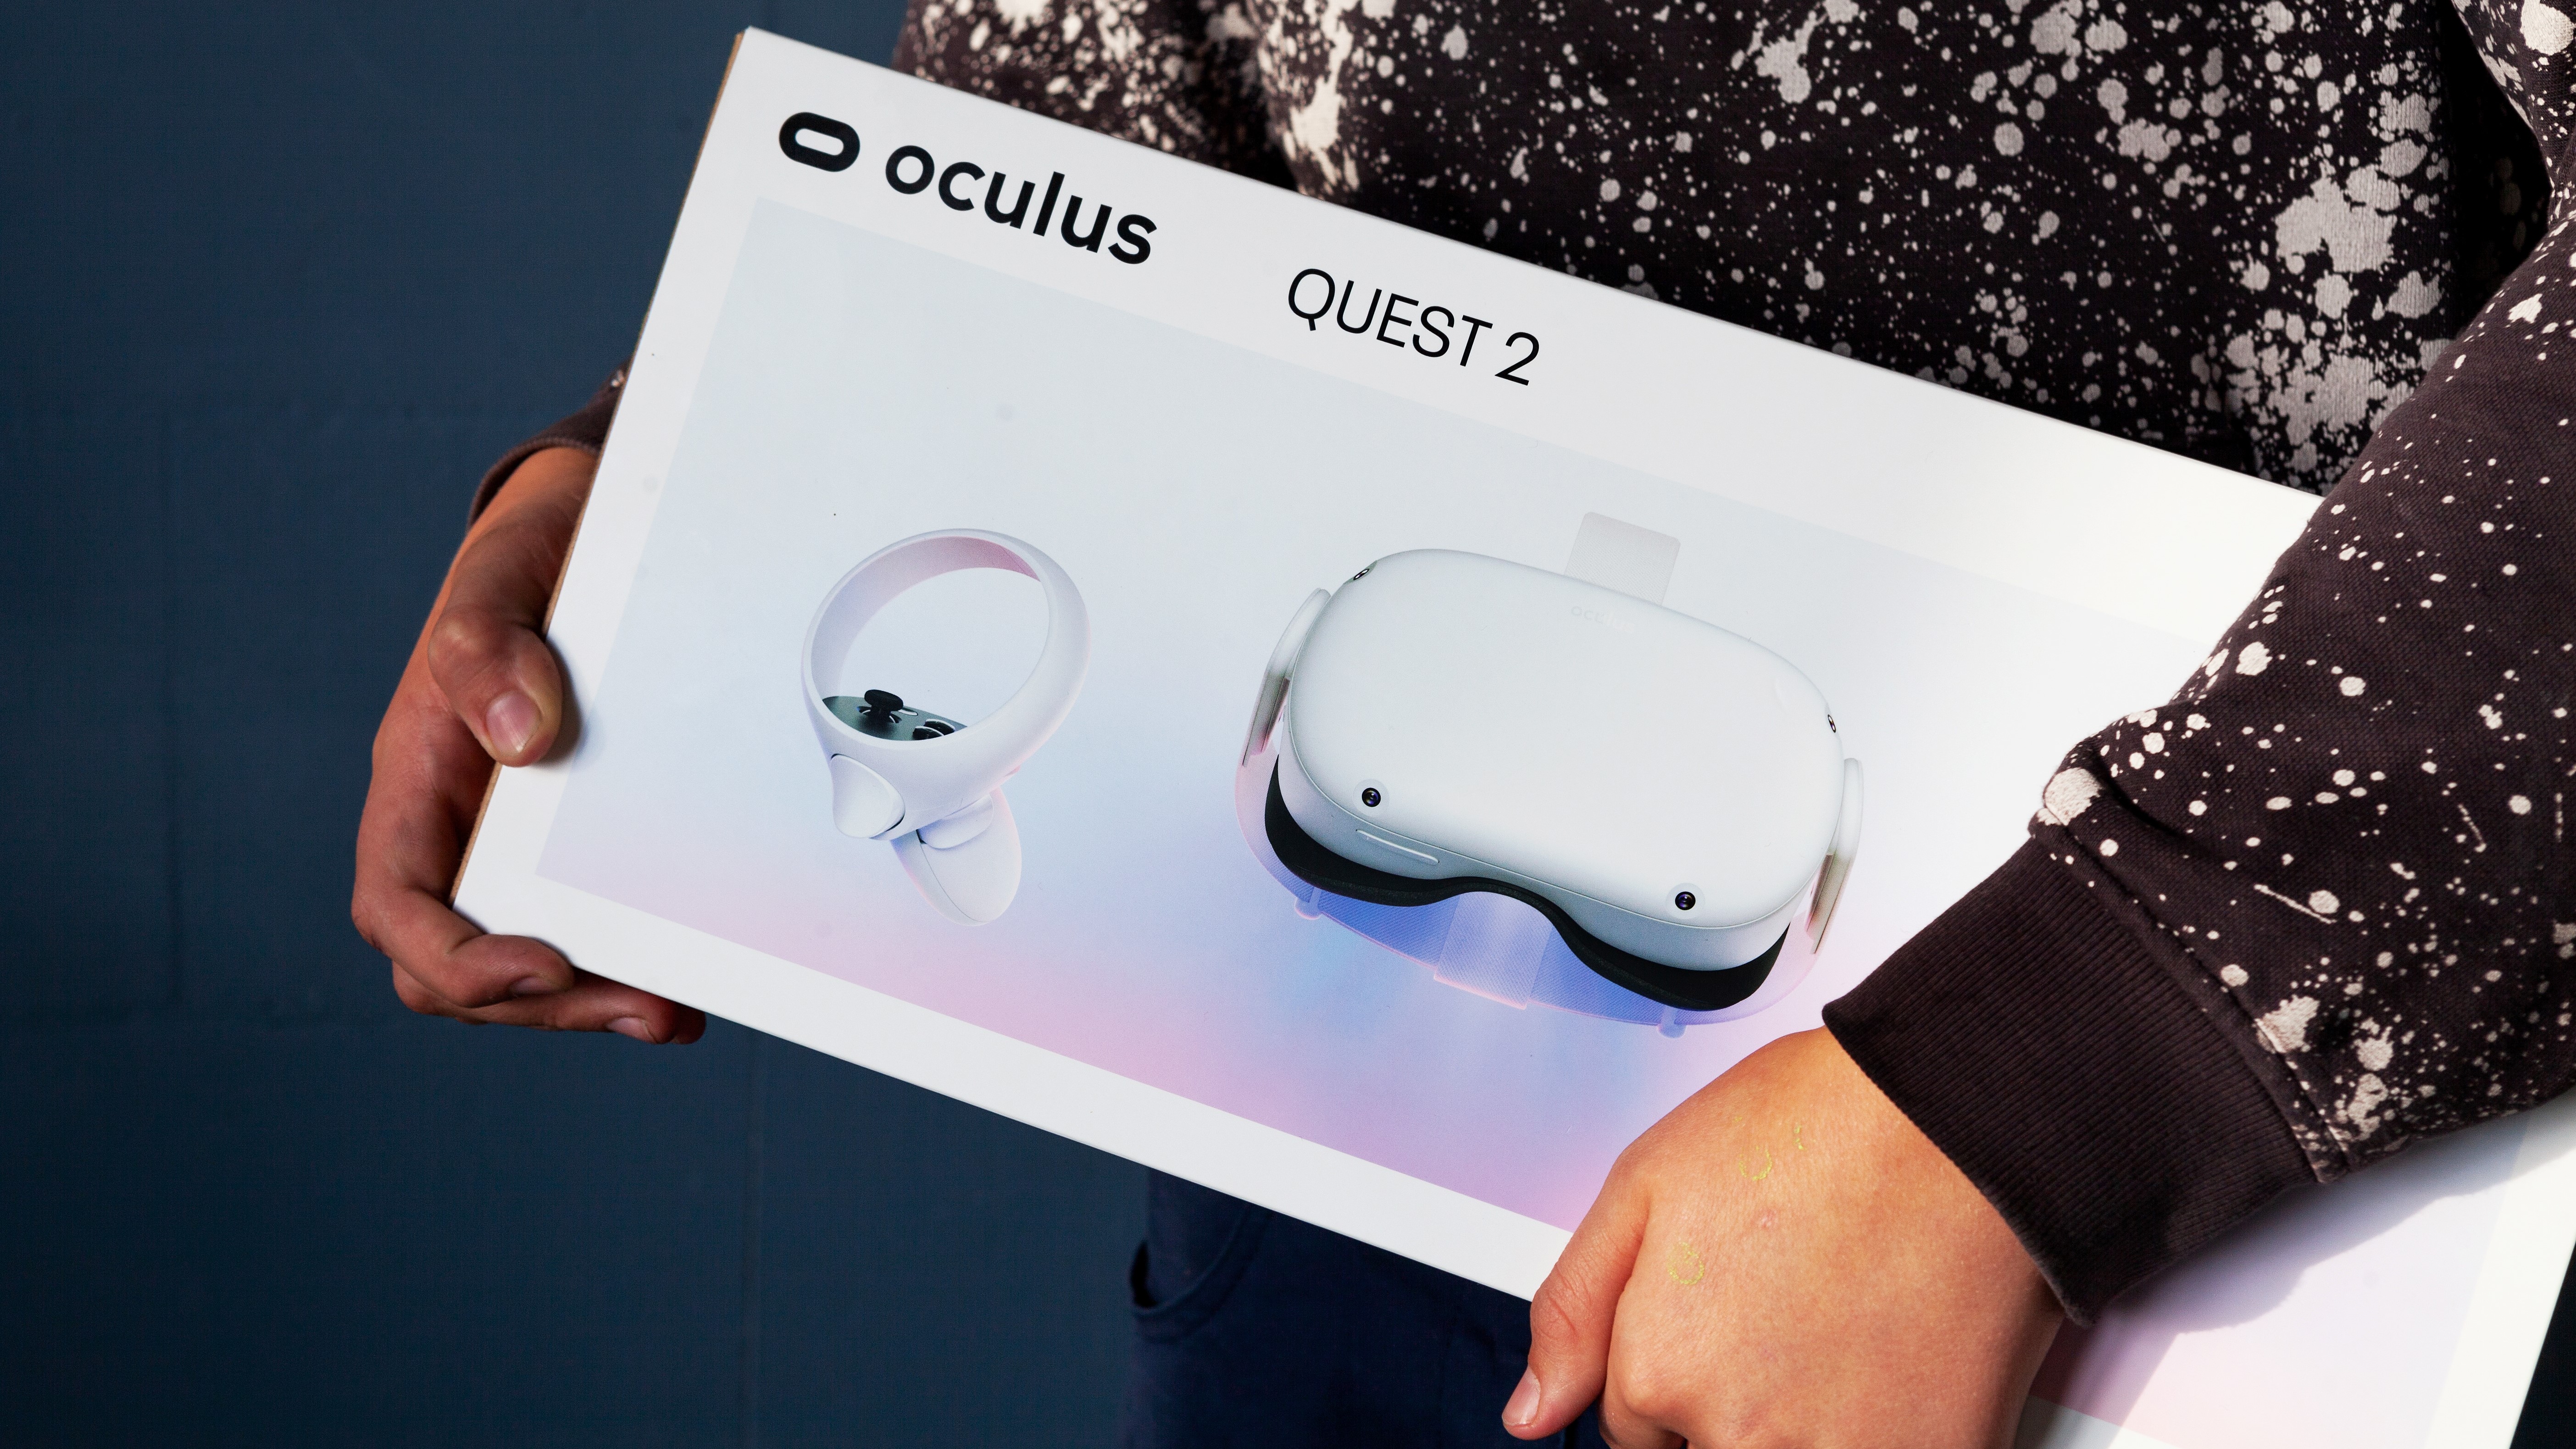 Person holding a box with an Oculus Quest 2 VR headset inside